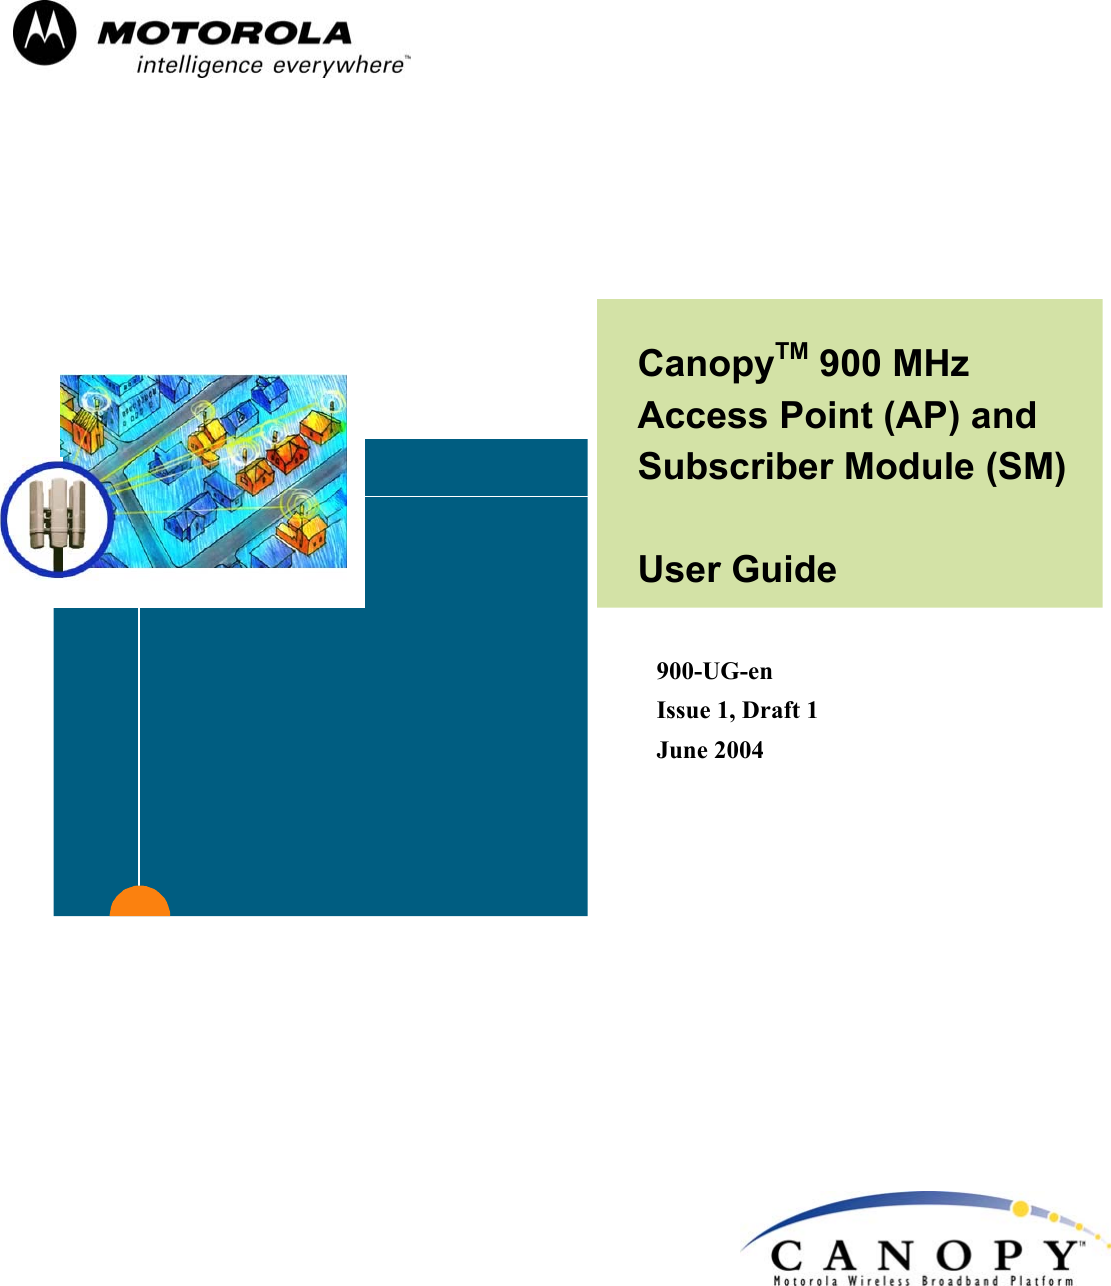 900-UG-enIssue 1, Draft 1June 2004CanopyTM 900 MHzAccess Point (AP) andSubscriber Module (SM)User GuideSoftware Release Notes